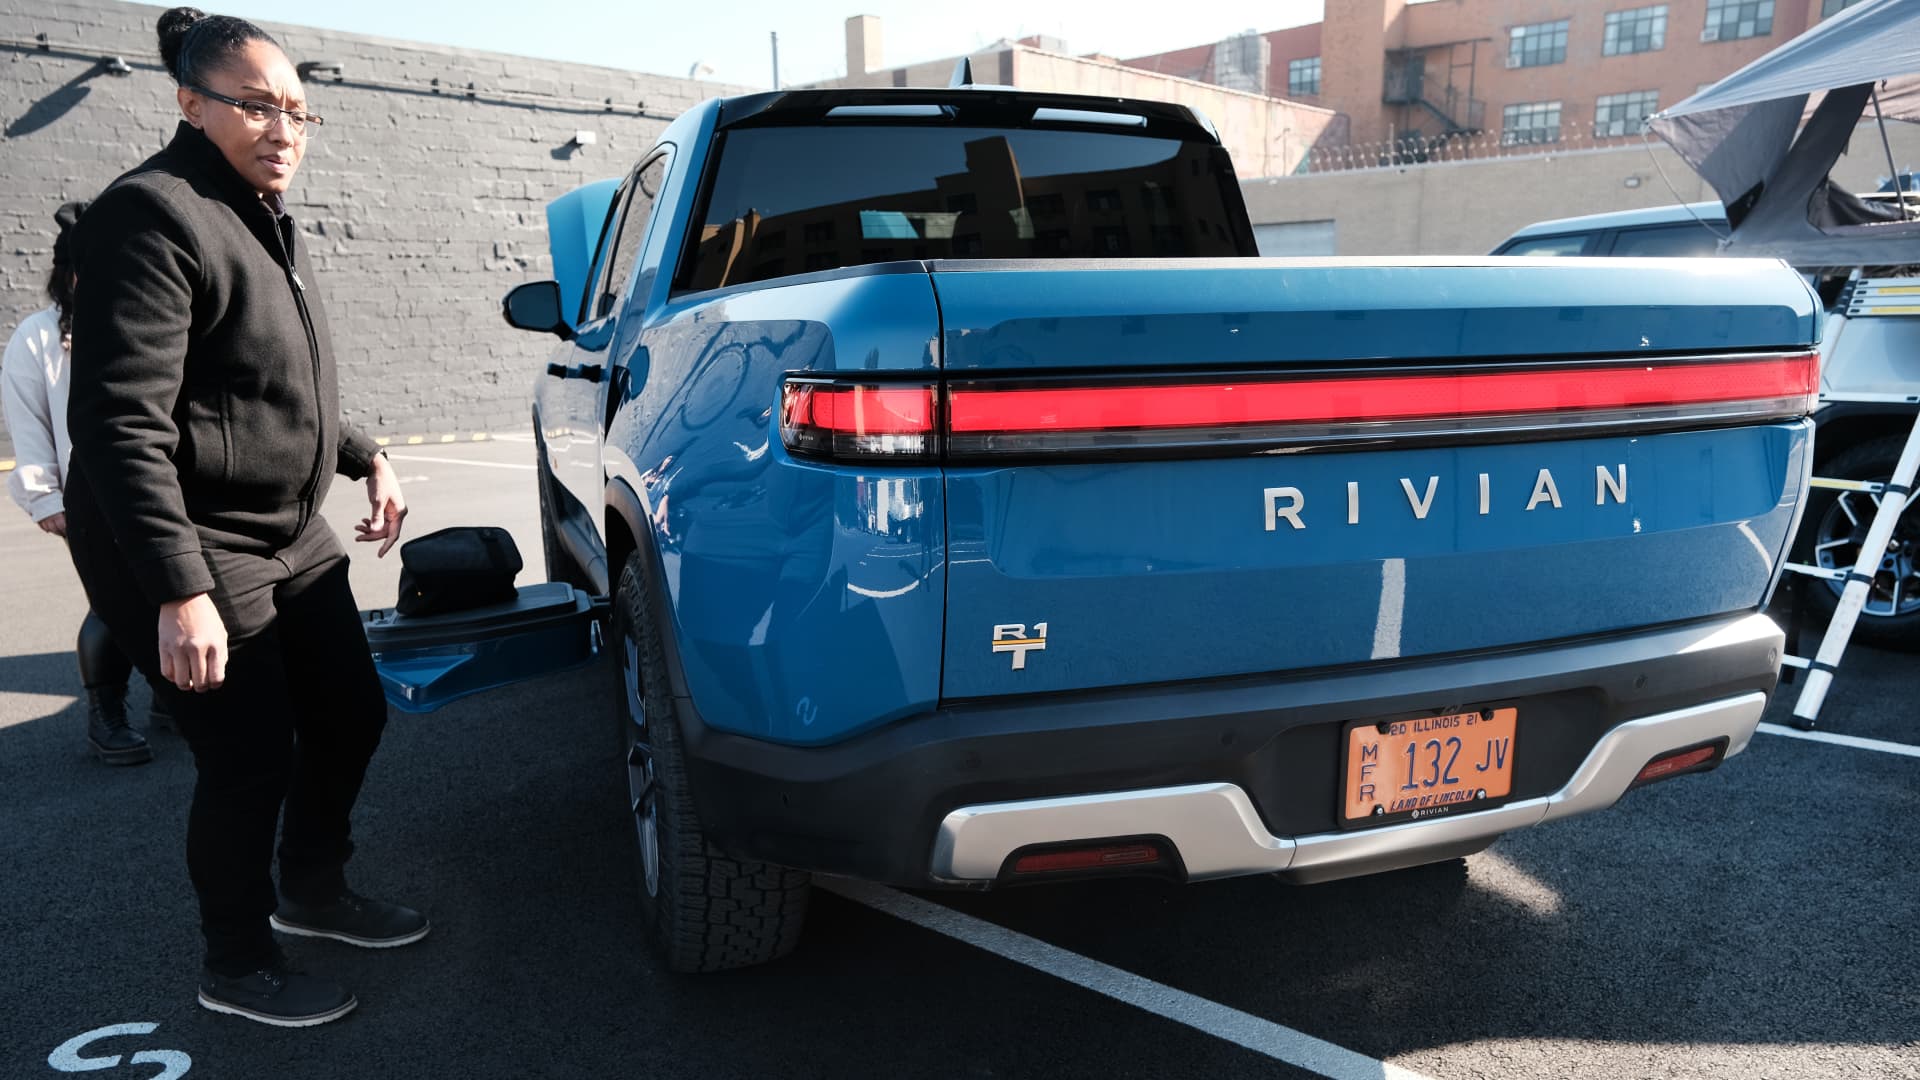 Rivian employees stand beside the new all-electric pickup truck by Rivian, the R1T, as it sits at one of its facilities on November 09, 2021 in the Brooklyn borough of New York City.